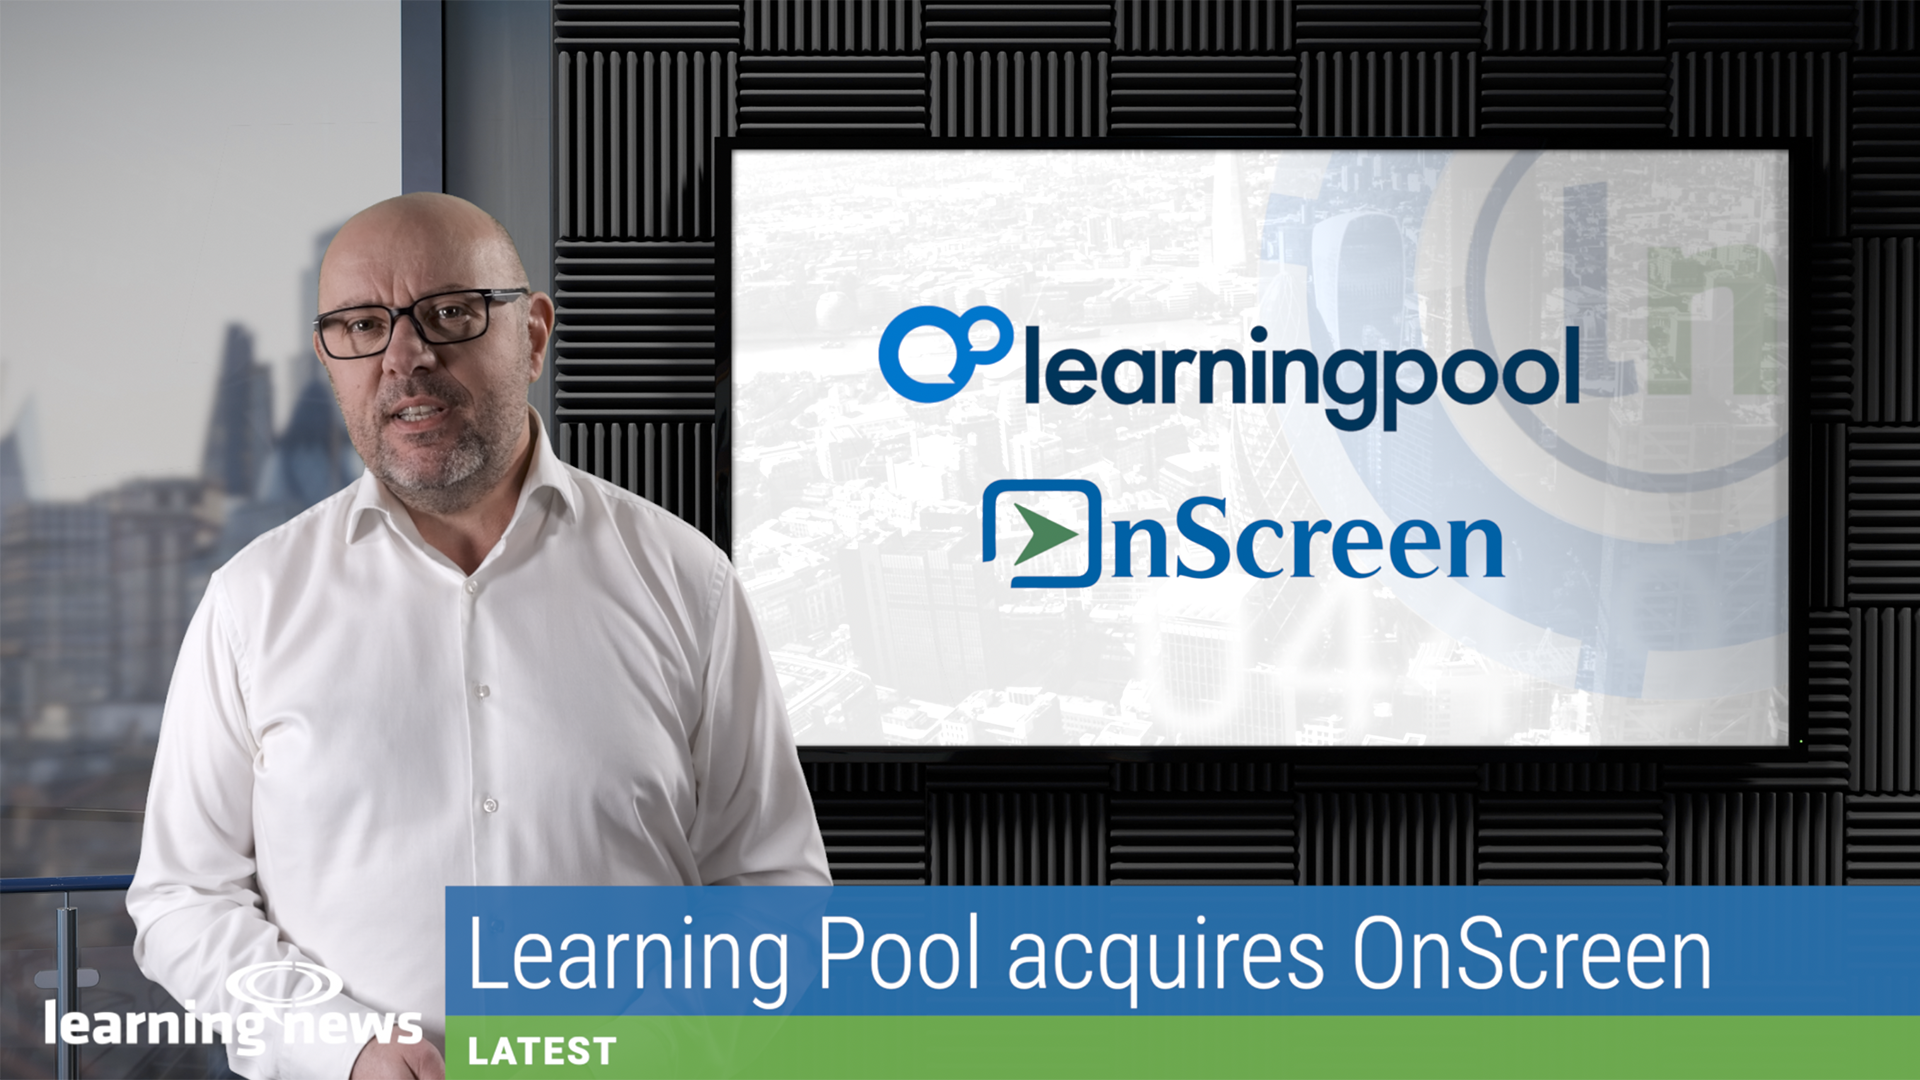 Learning Pool has entered the digital adoption platform market with the acquisition of OnScreen